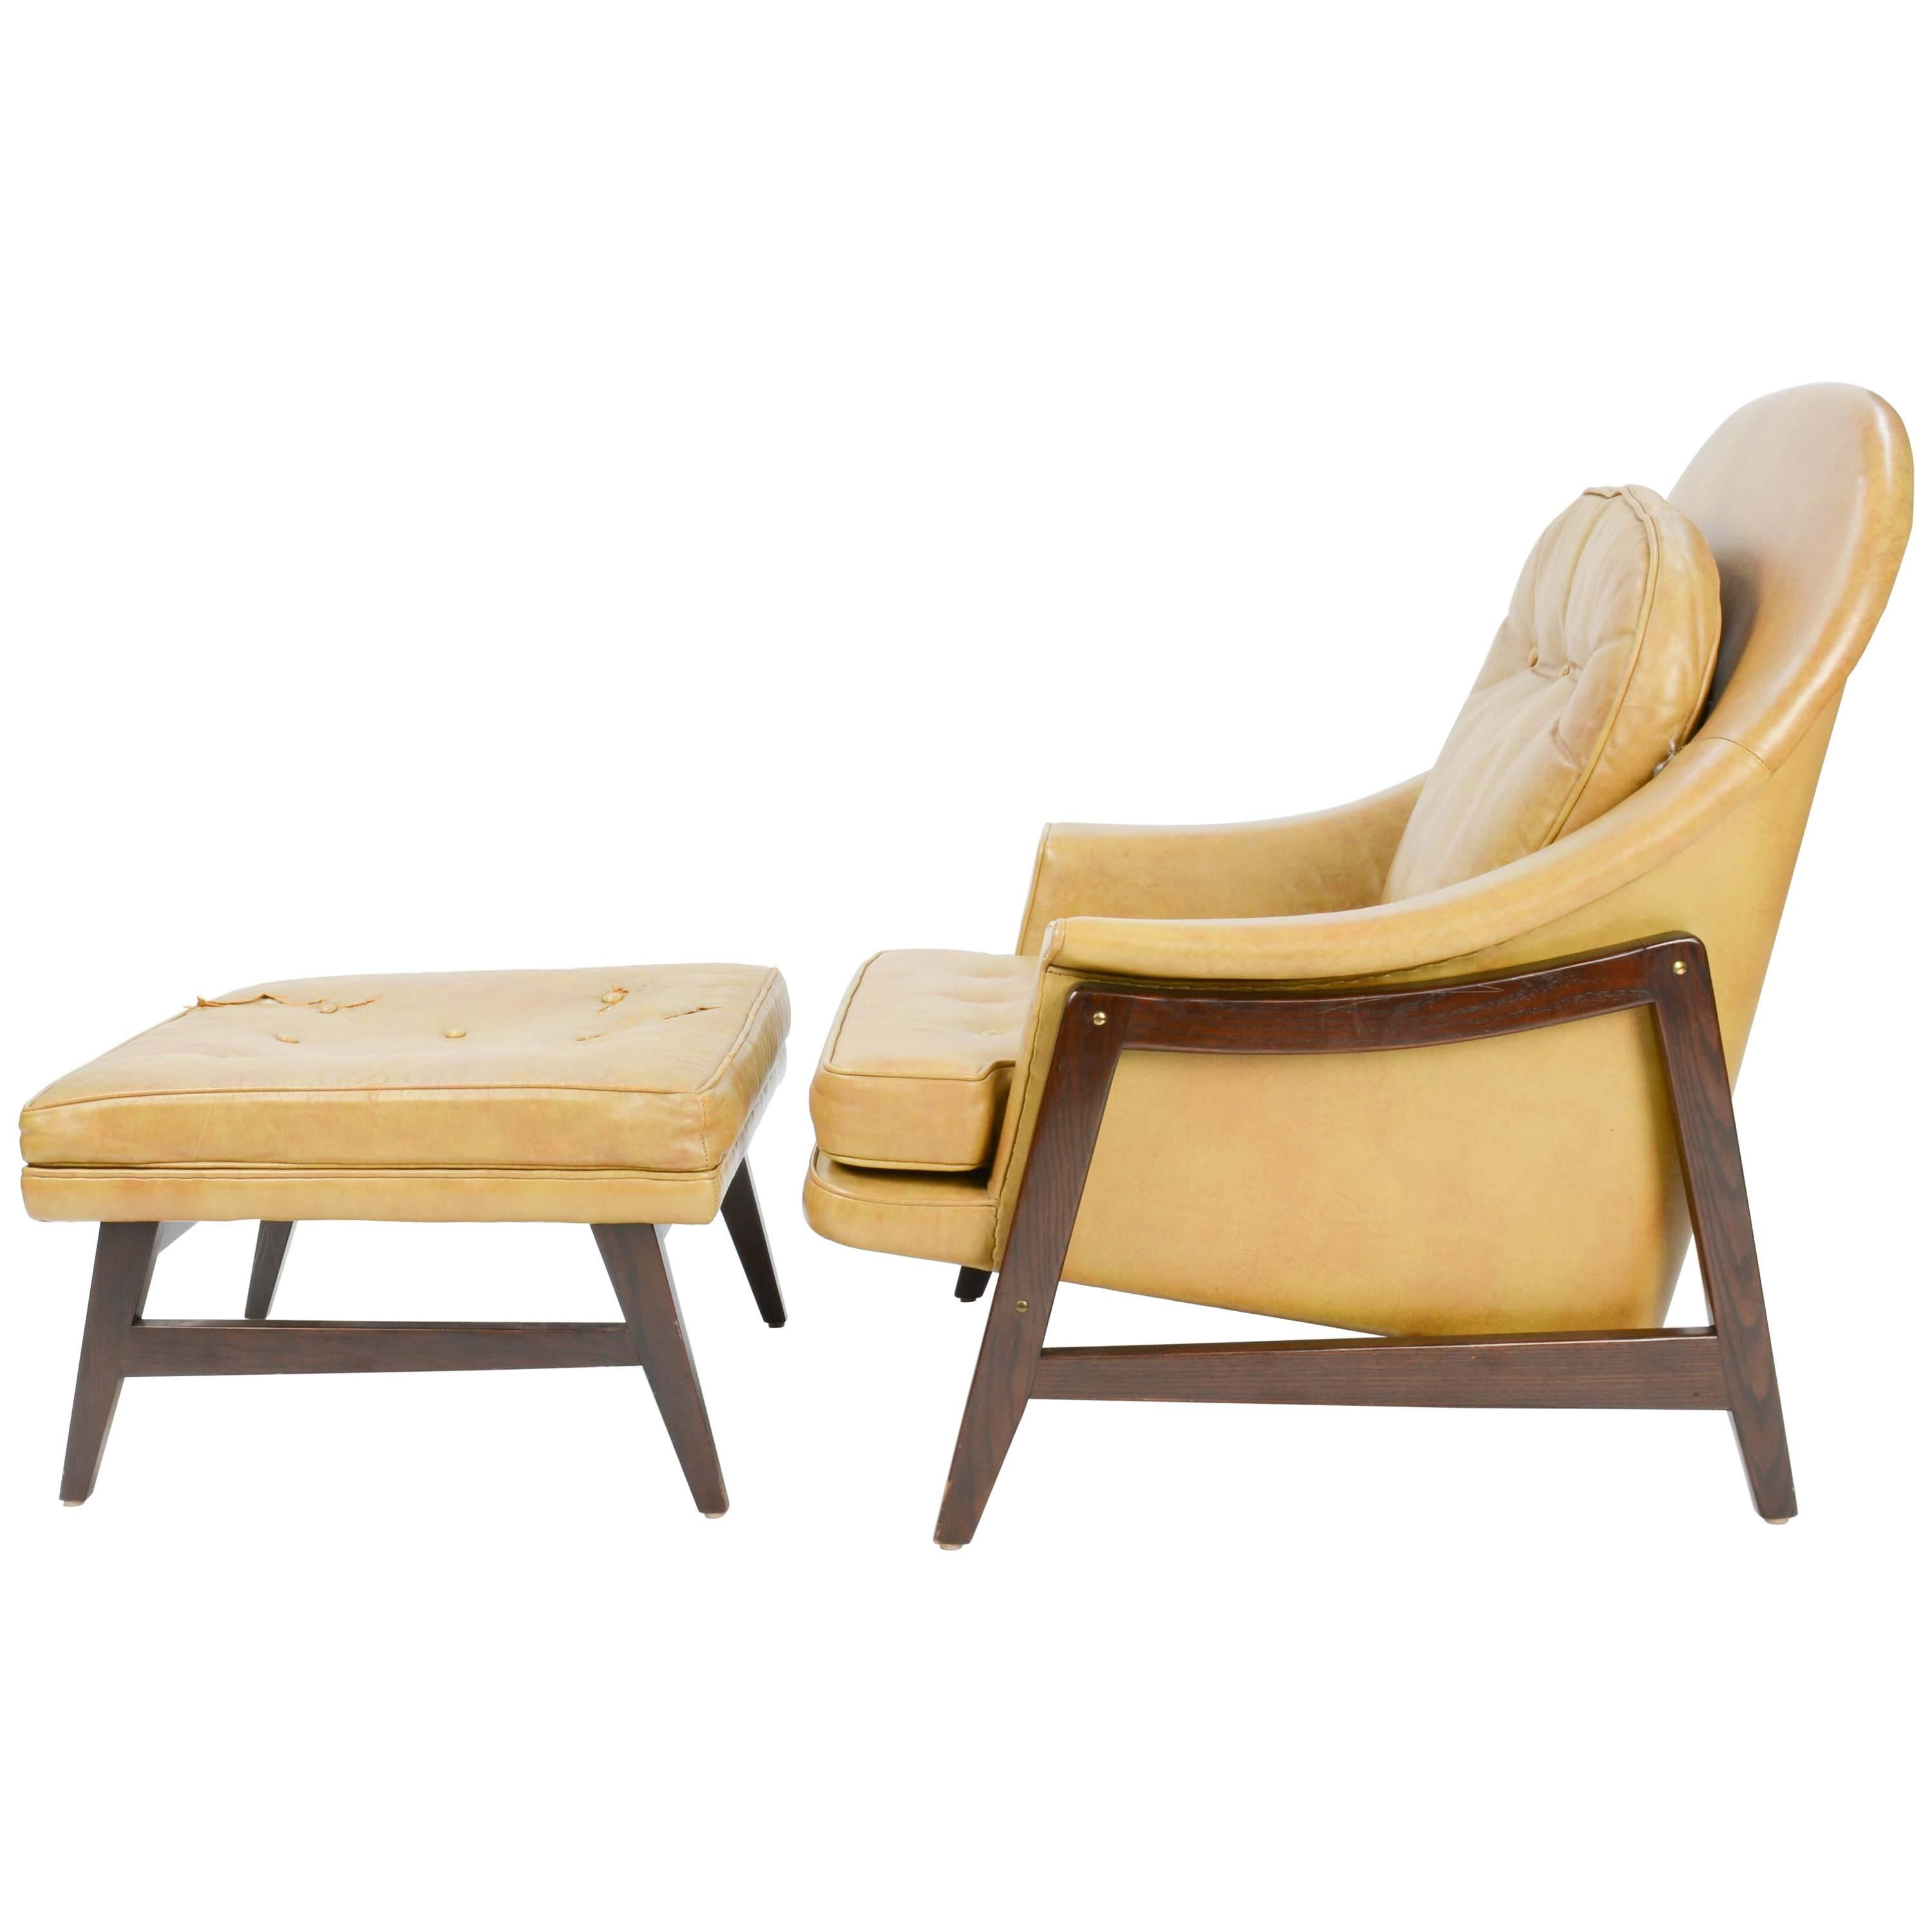 Edward Wormley's Signature Janus Group Club Chair and Ottoman for Dunbar For Sale